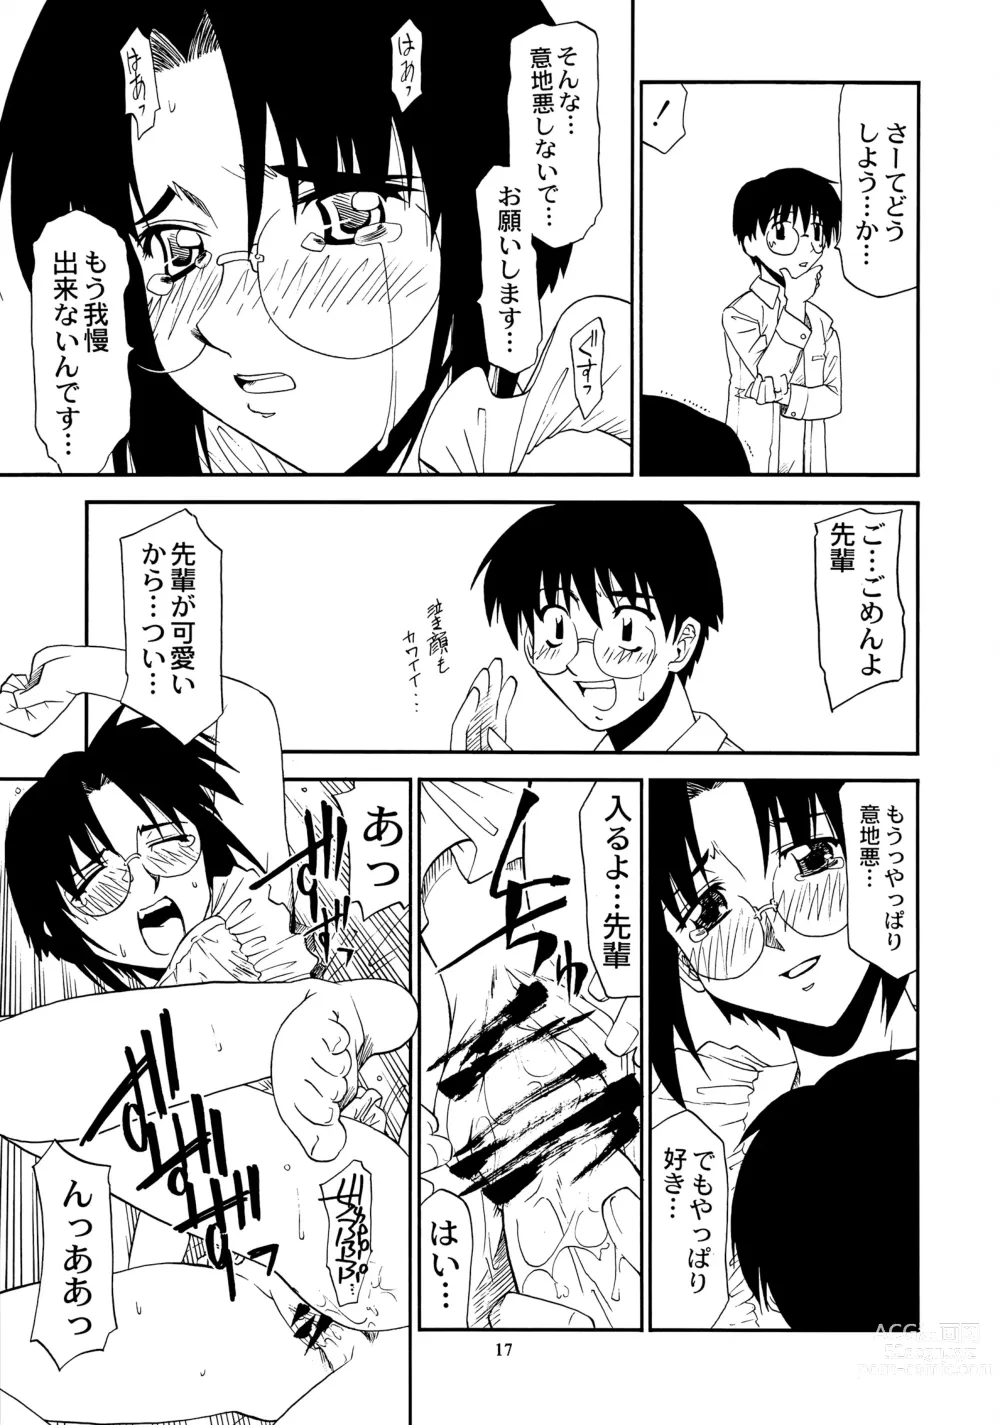 Page 16 of doujinshi Curry Rice no Onna